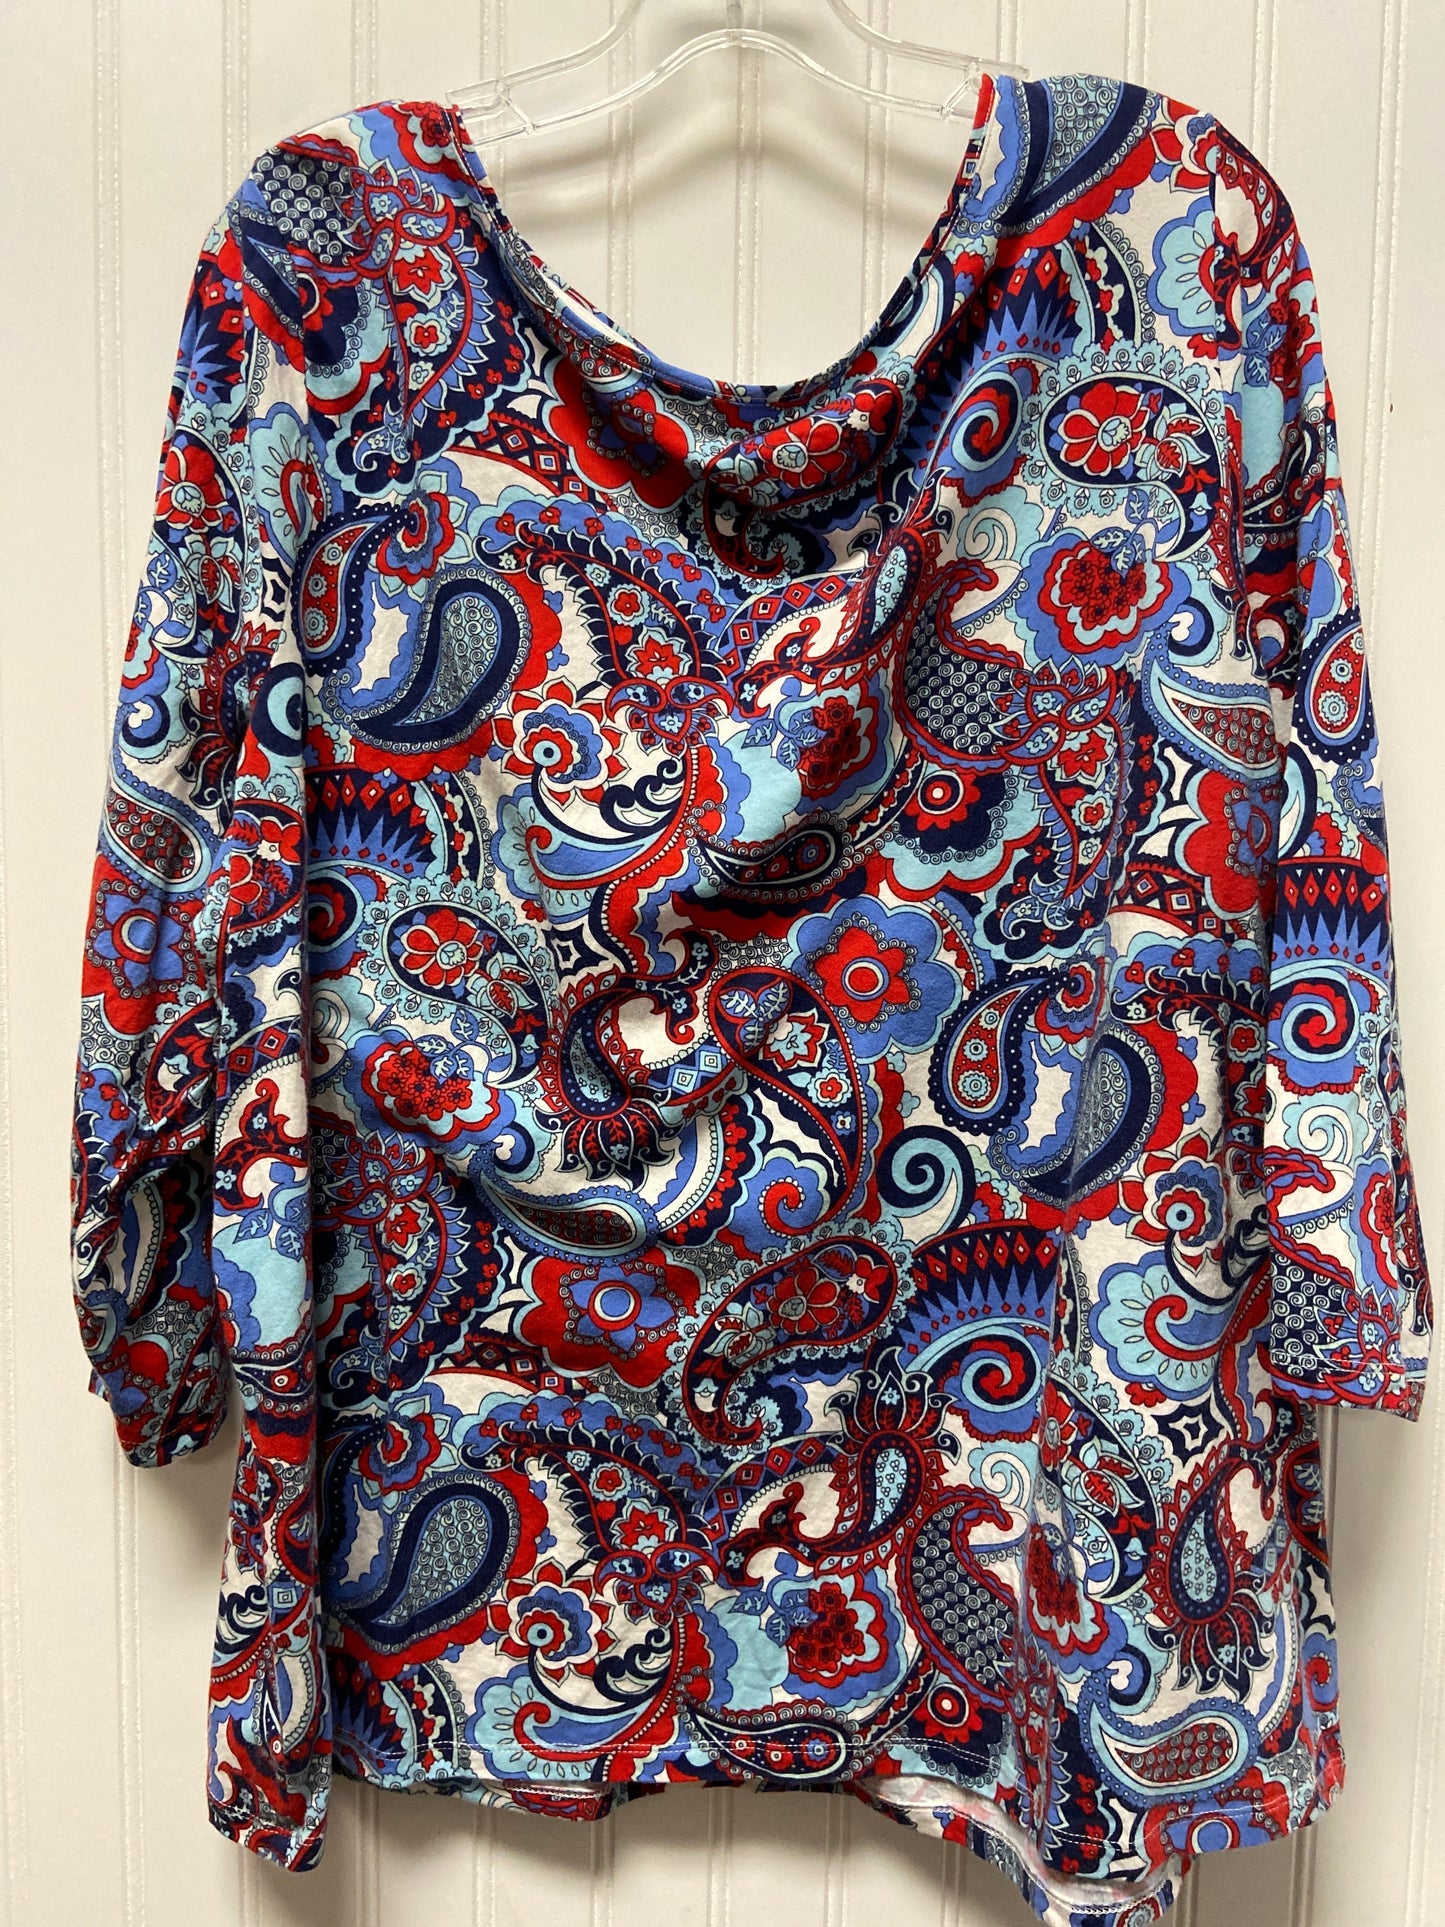 Blue & Red & White Top Long Sleeve Talbots, Size 3x